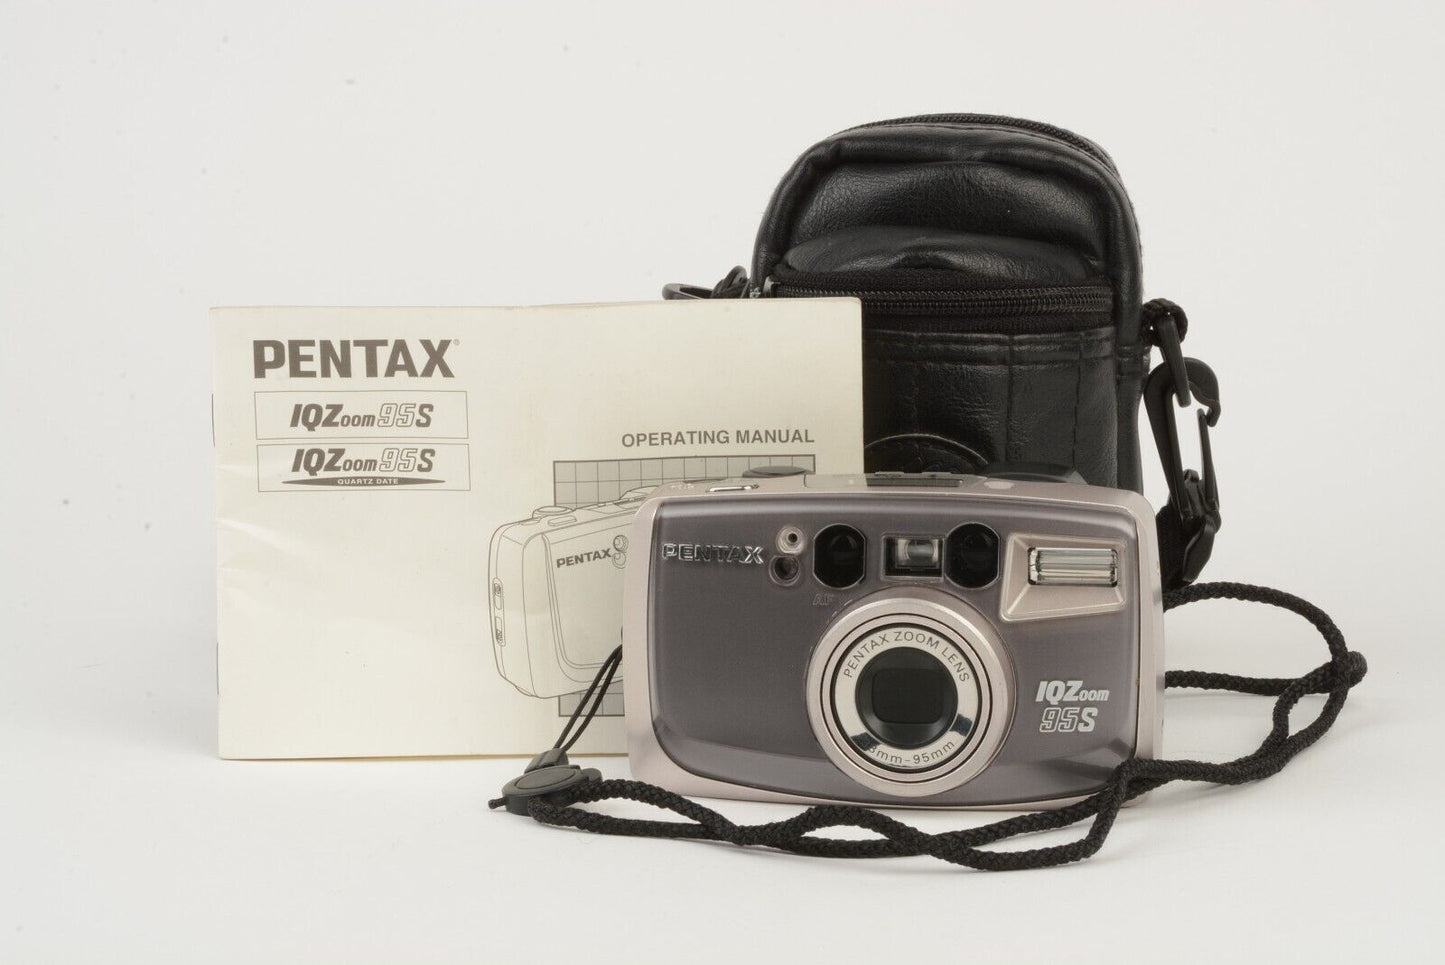 EXC++ PENTAX IQZOOM 95s 35mm POINT & SHOOT w/38-95mm ZOOM, CASE+MANUAL, TESTED